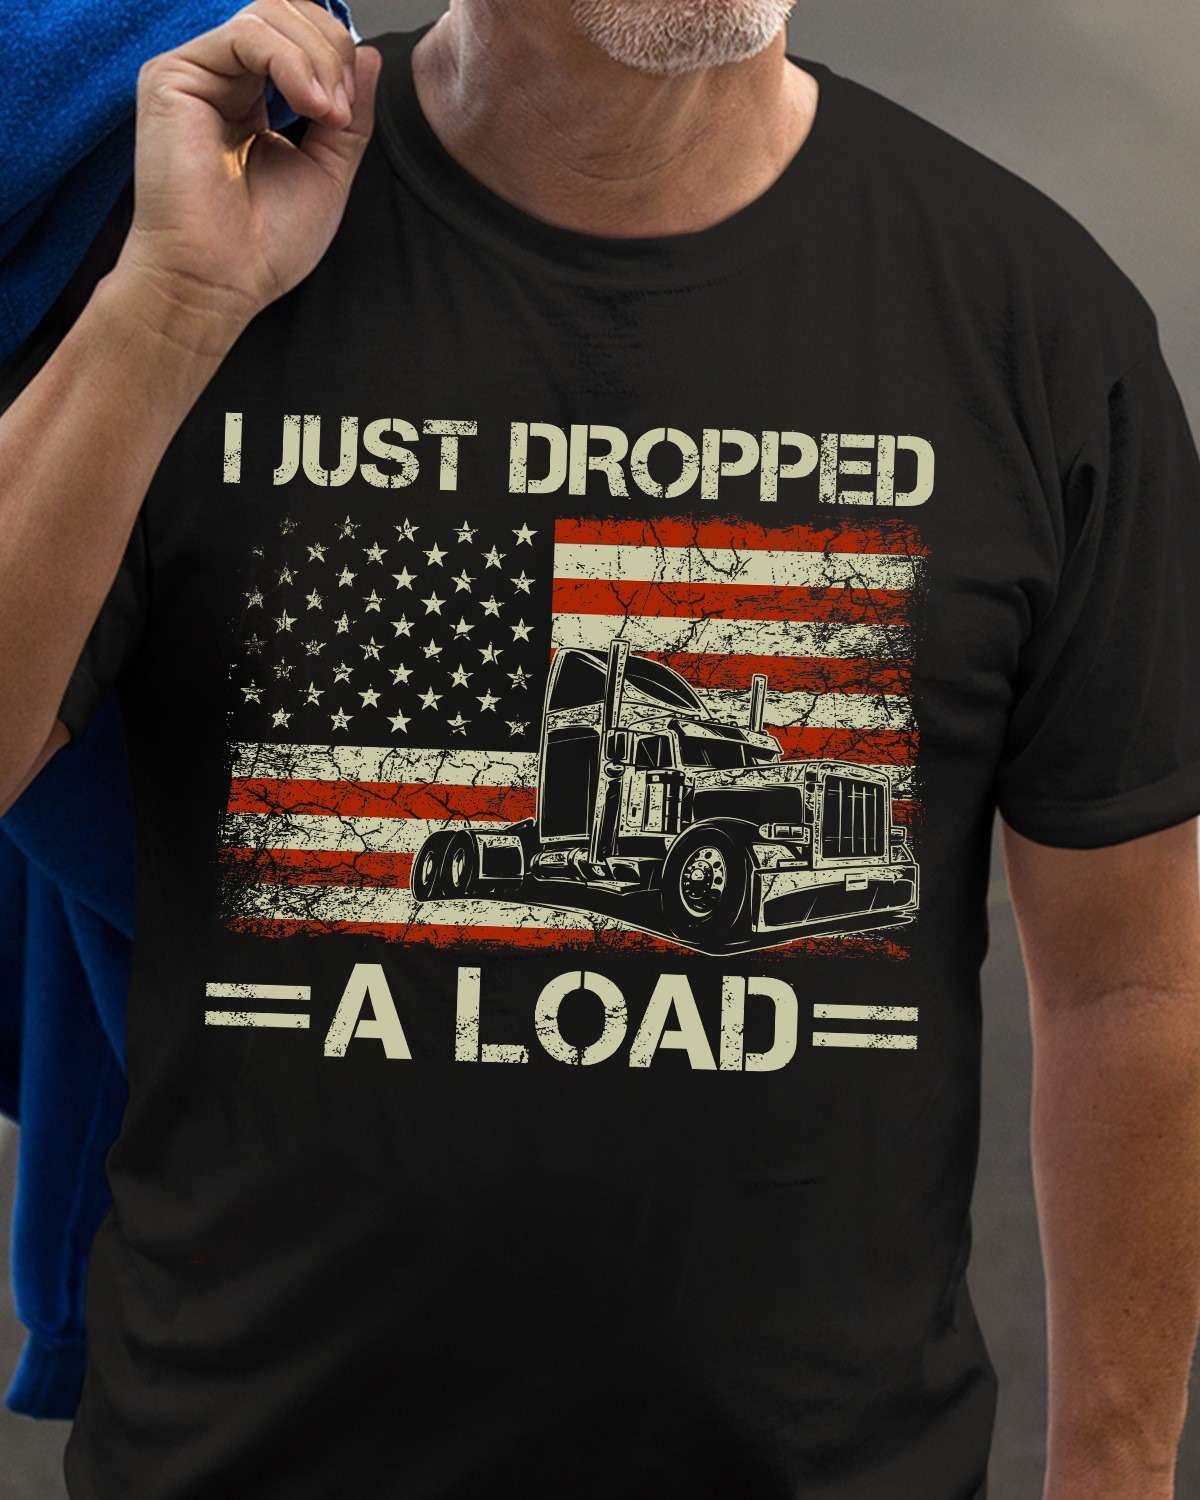 I just dropped a load - American trucker, truck driver the job